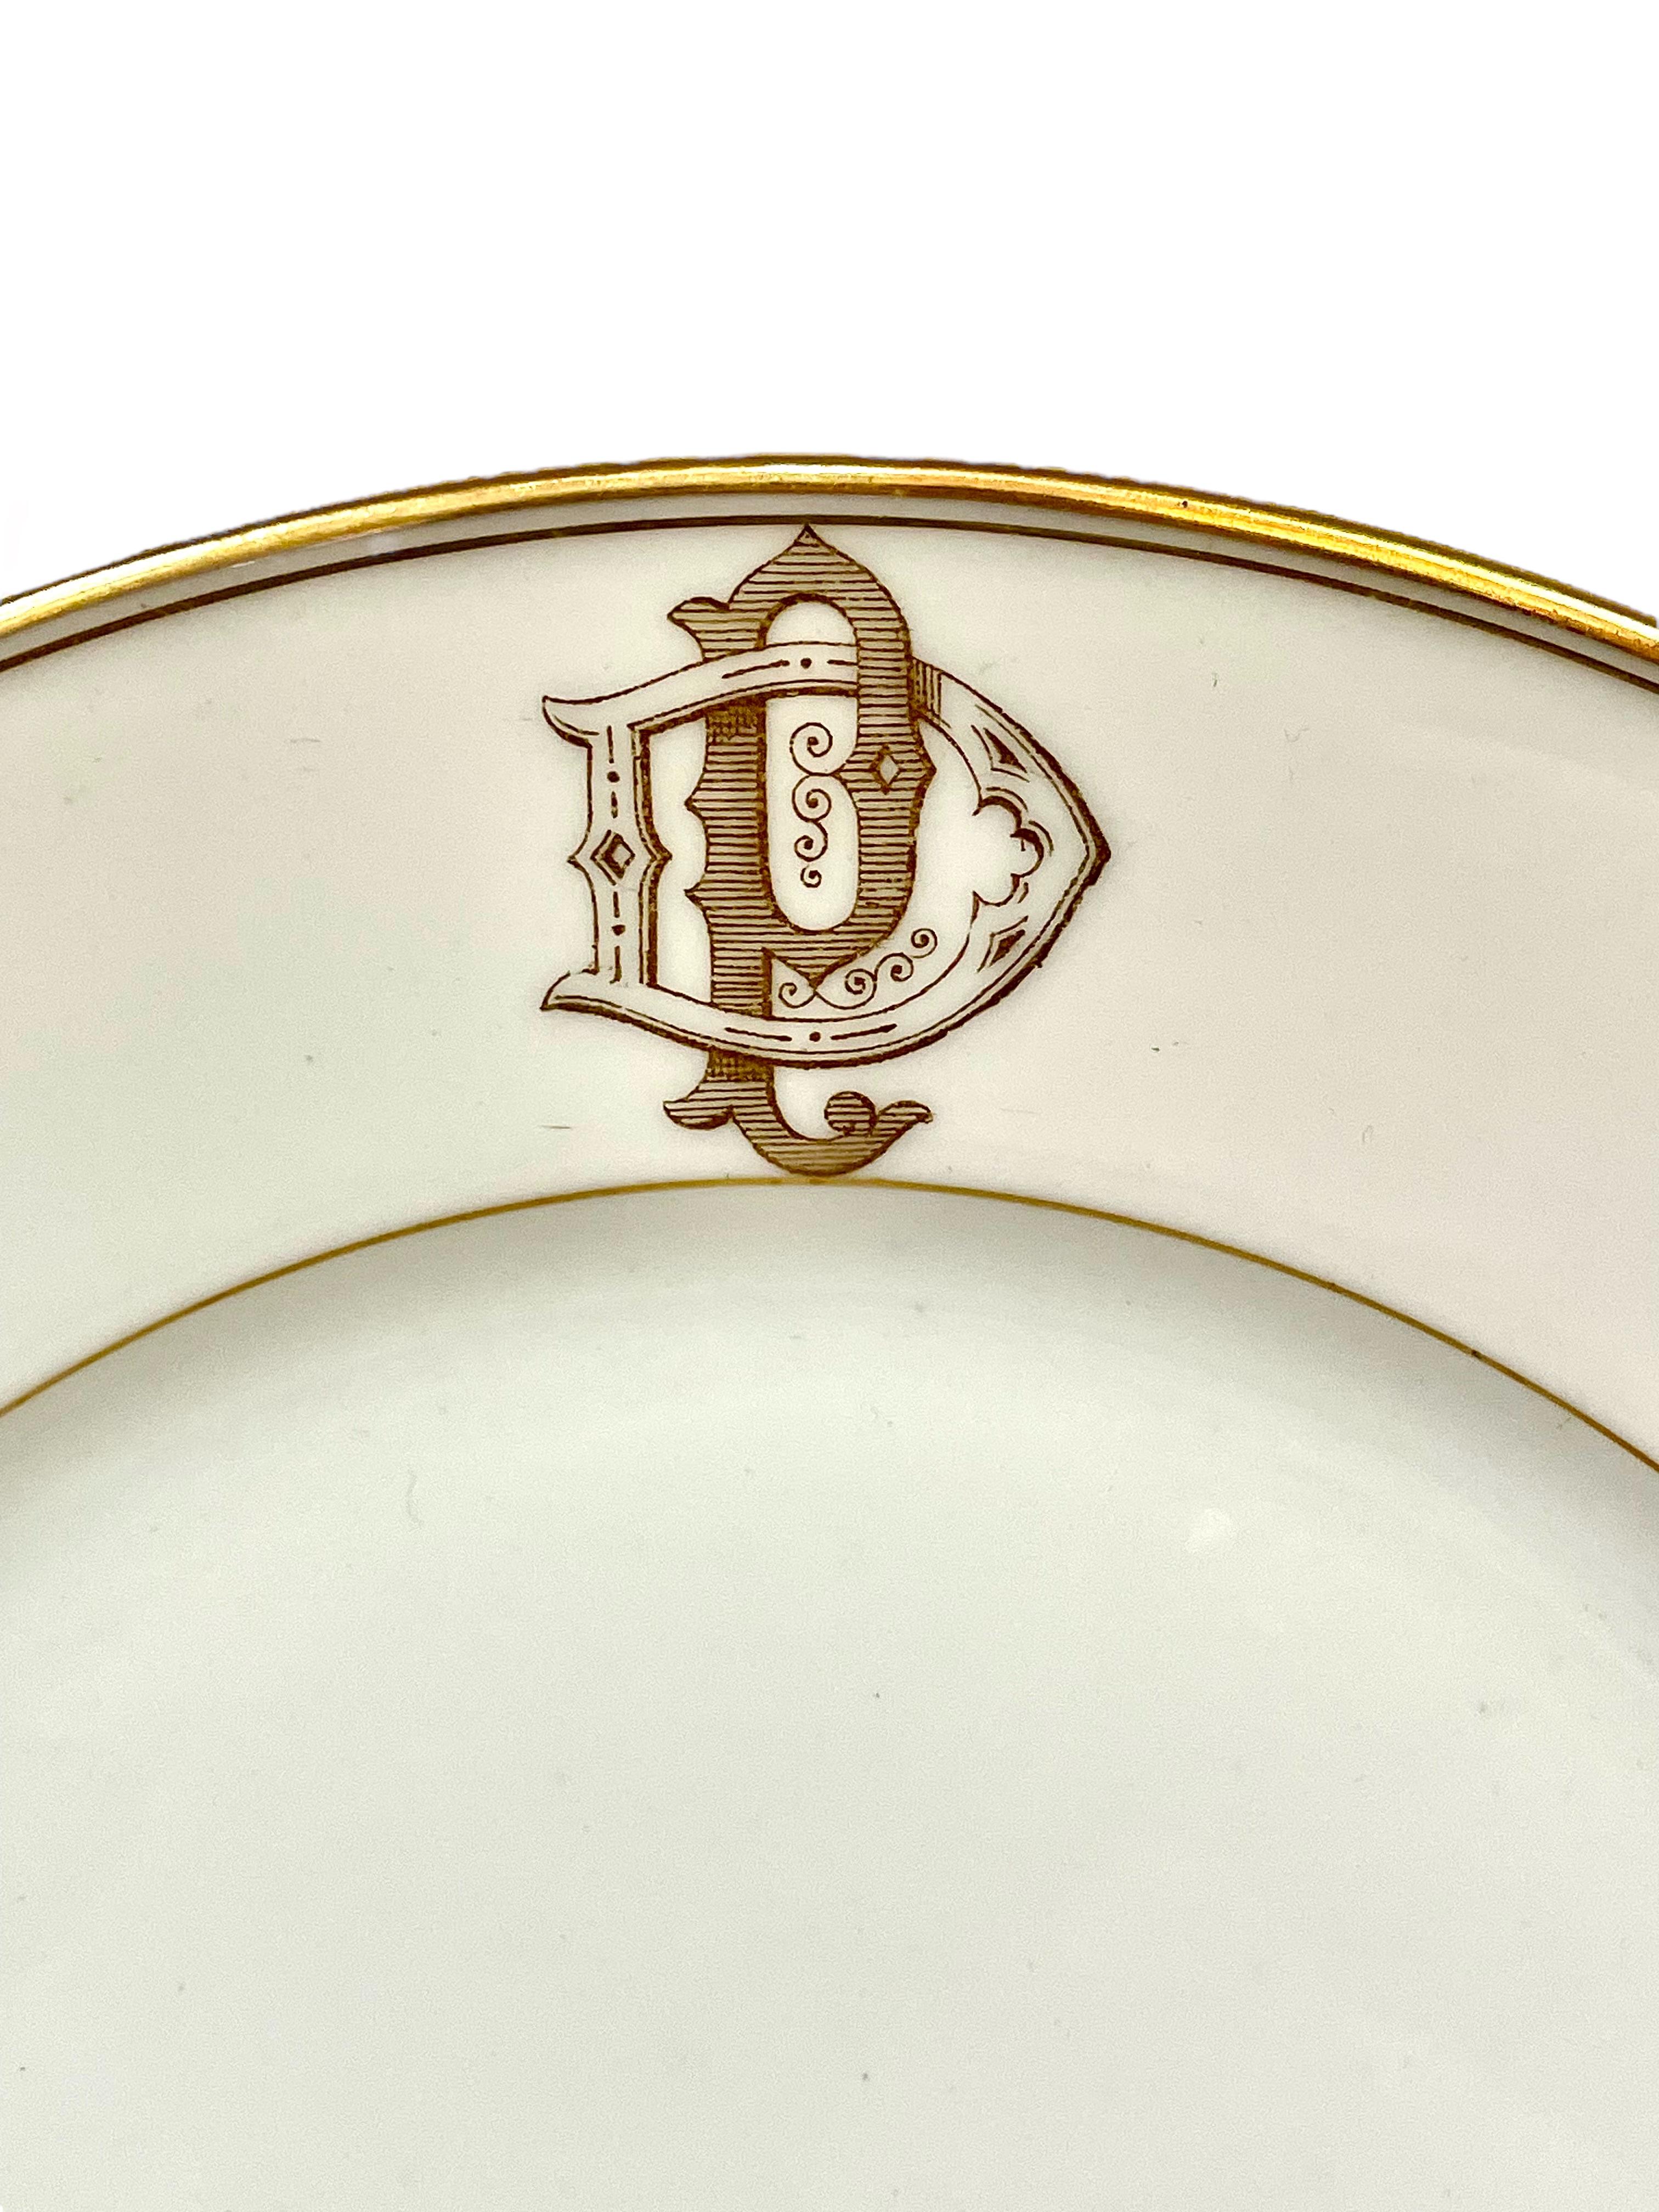 A set of 12 stylish dinner plates in delicate white Limoges porcelain, each piece edged with a fine rim of gilt, and bearing the elaborately formed monogramme 'DP'. Dating from the late 19th century, the set is in excellent overall condition, with